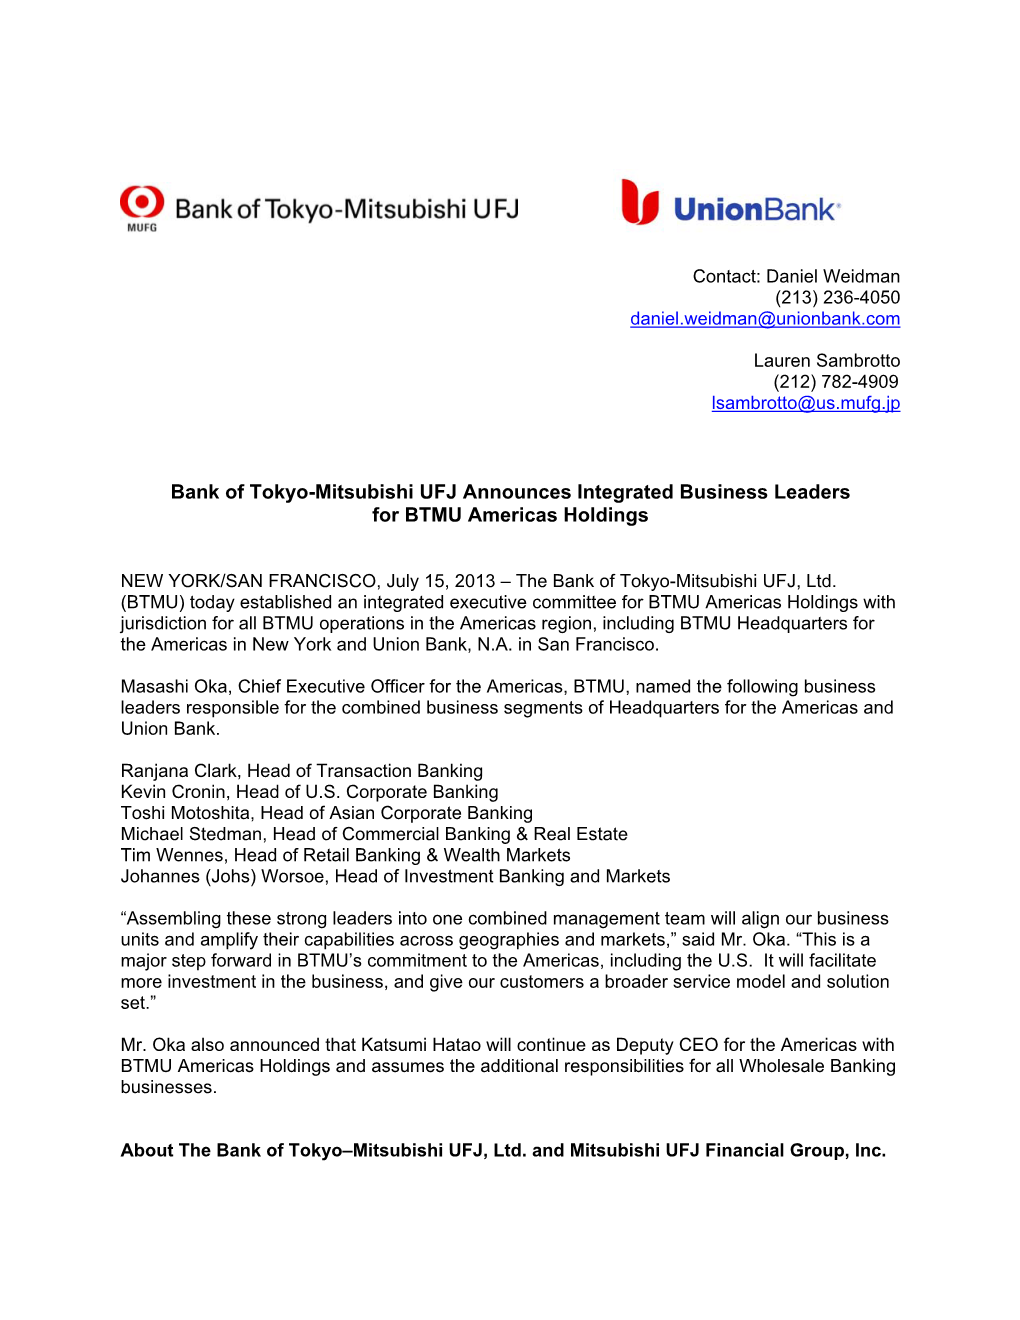 Bank of Tokyo-Mitsubishi UFJ Announces Integrated Business Leaders for BTMU Americas Holdings